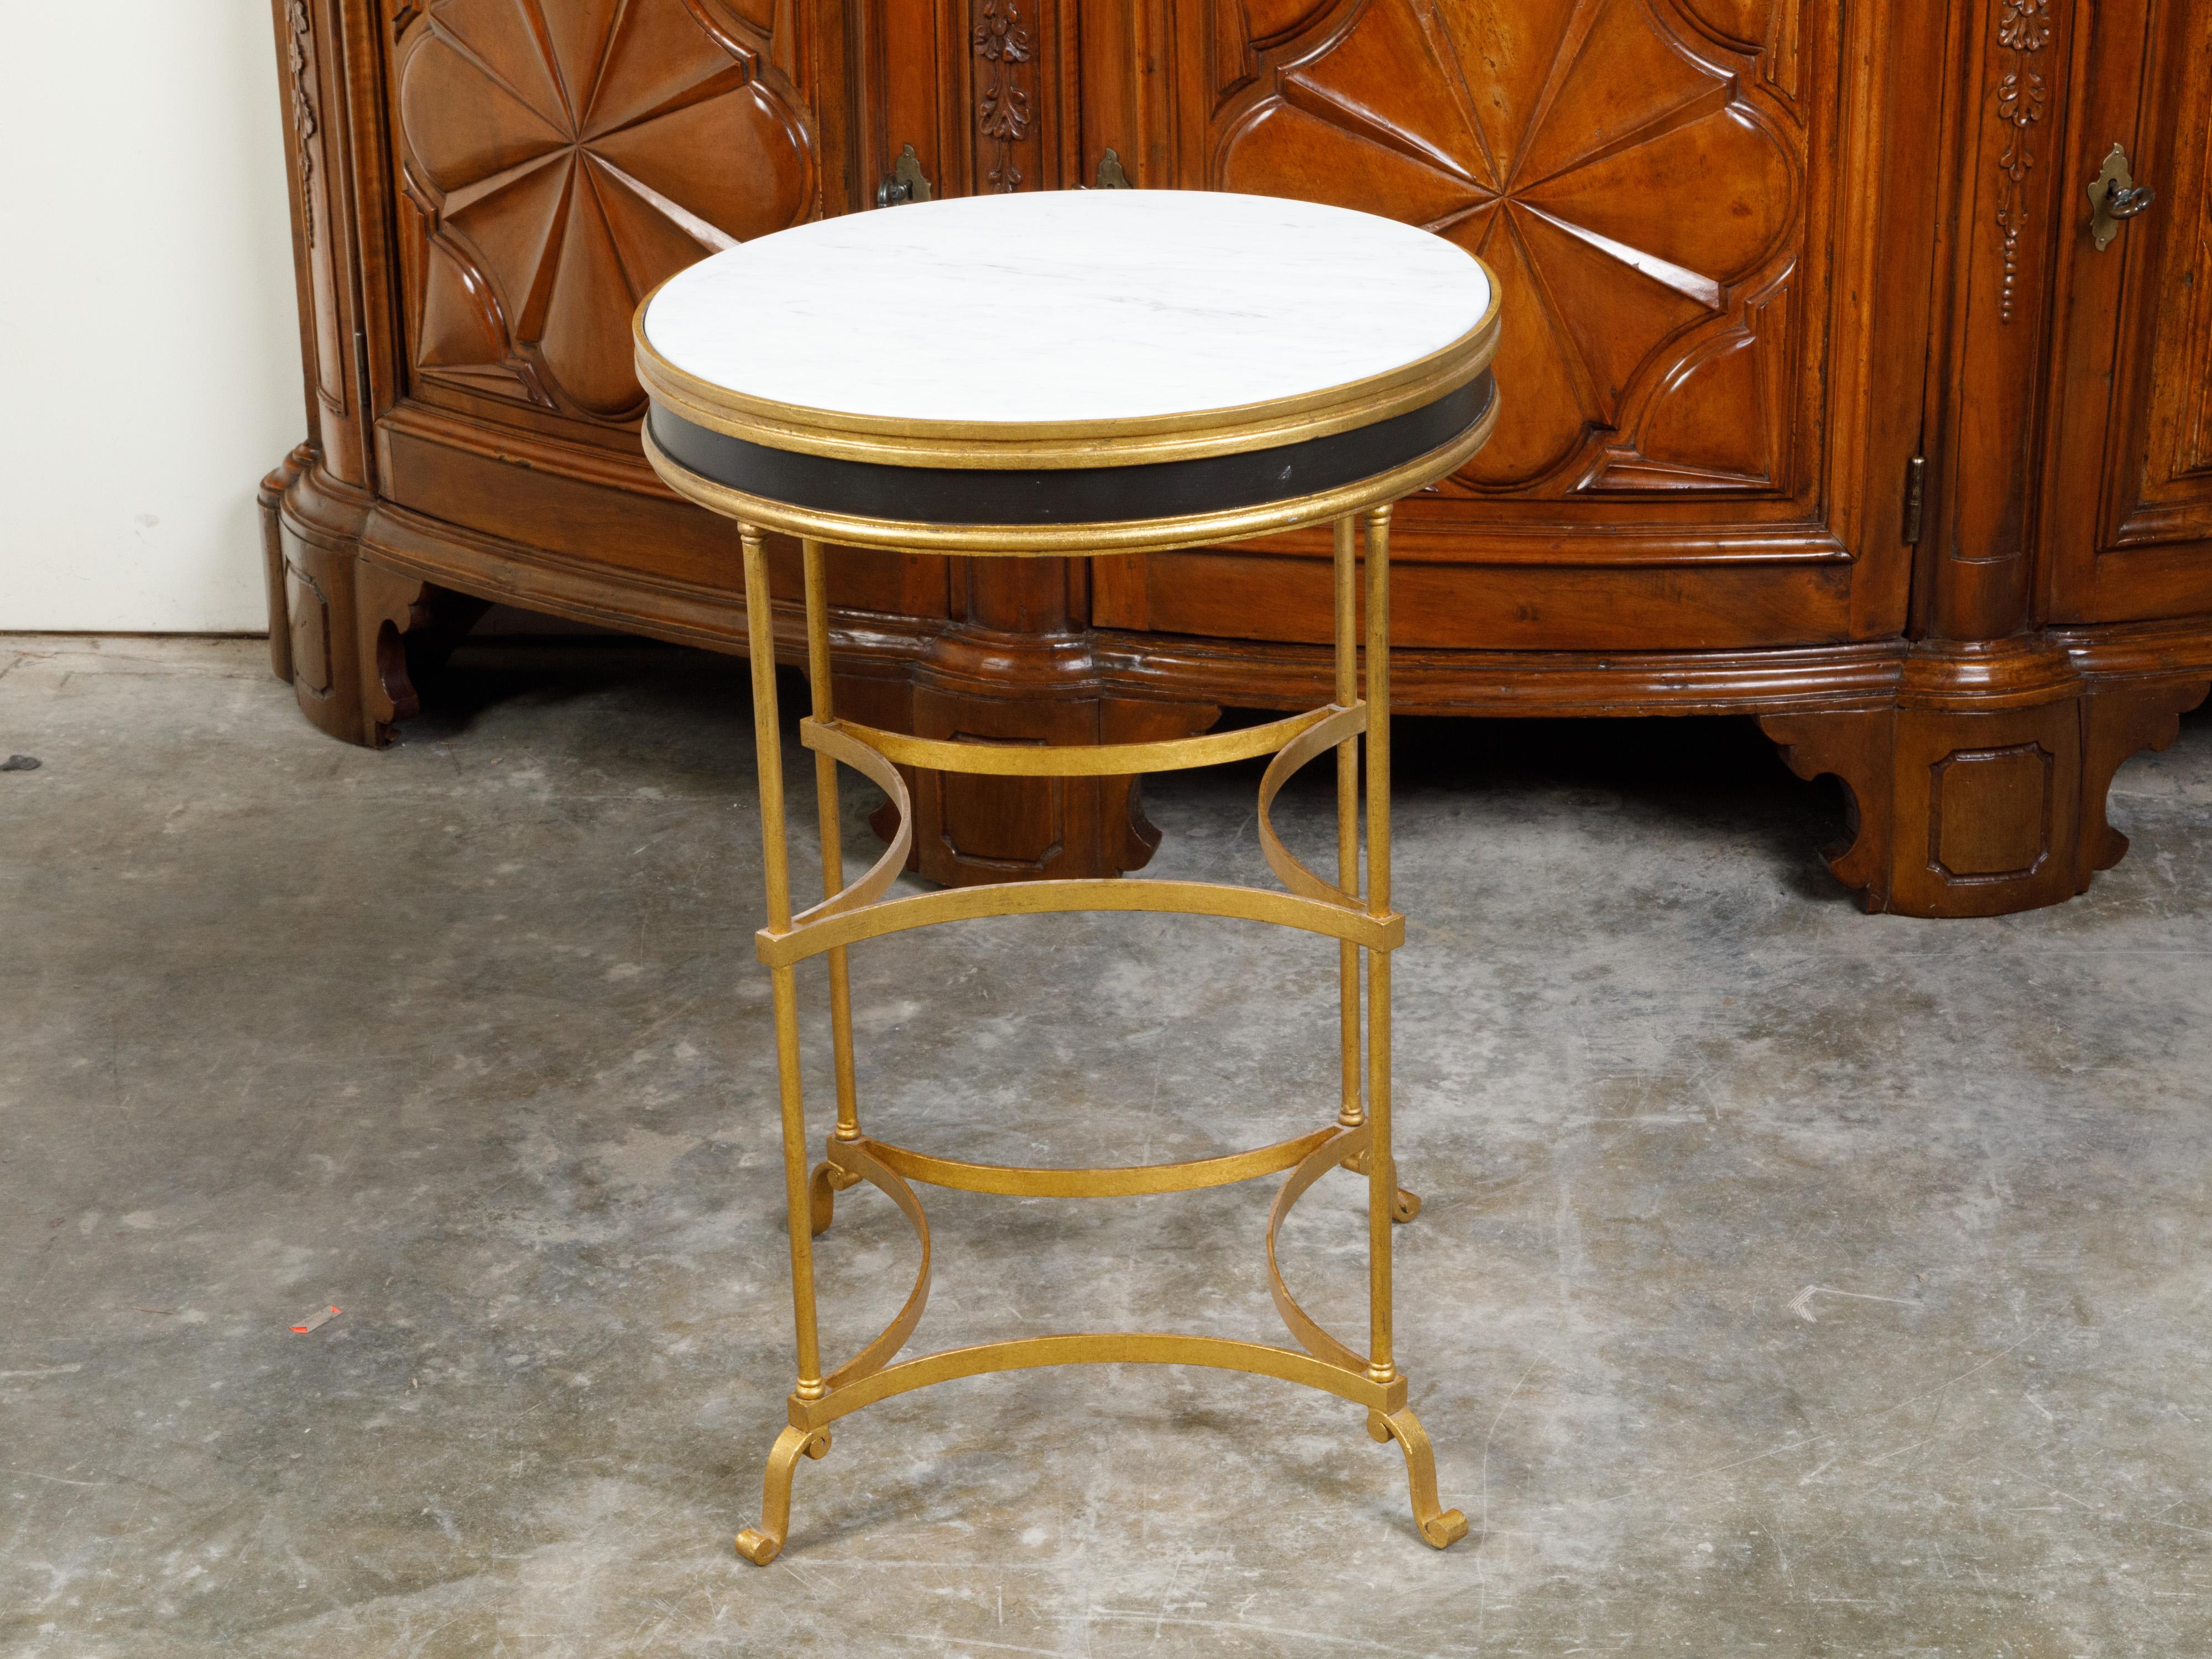 Italian Midcentury Gilt Metal Table with Marble Top and In-Curving Stretchers For Sale 4